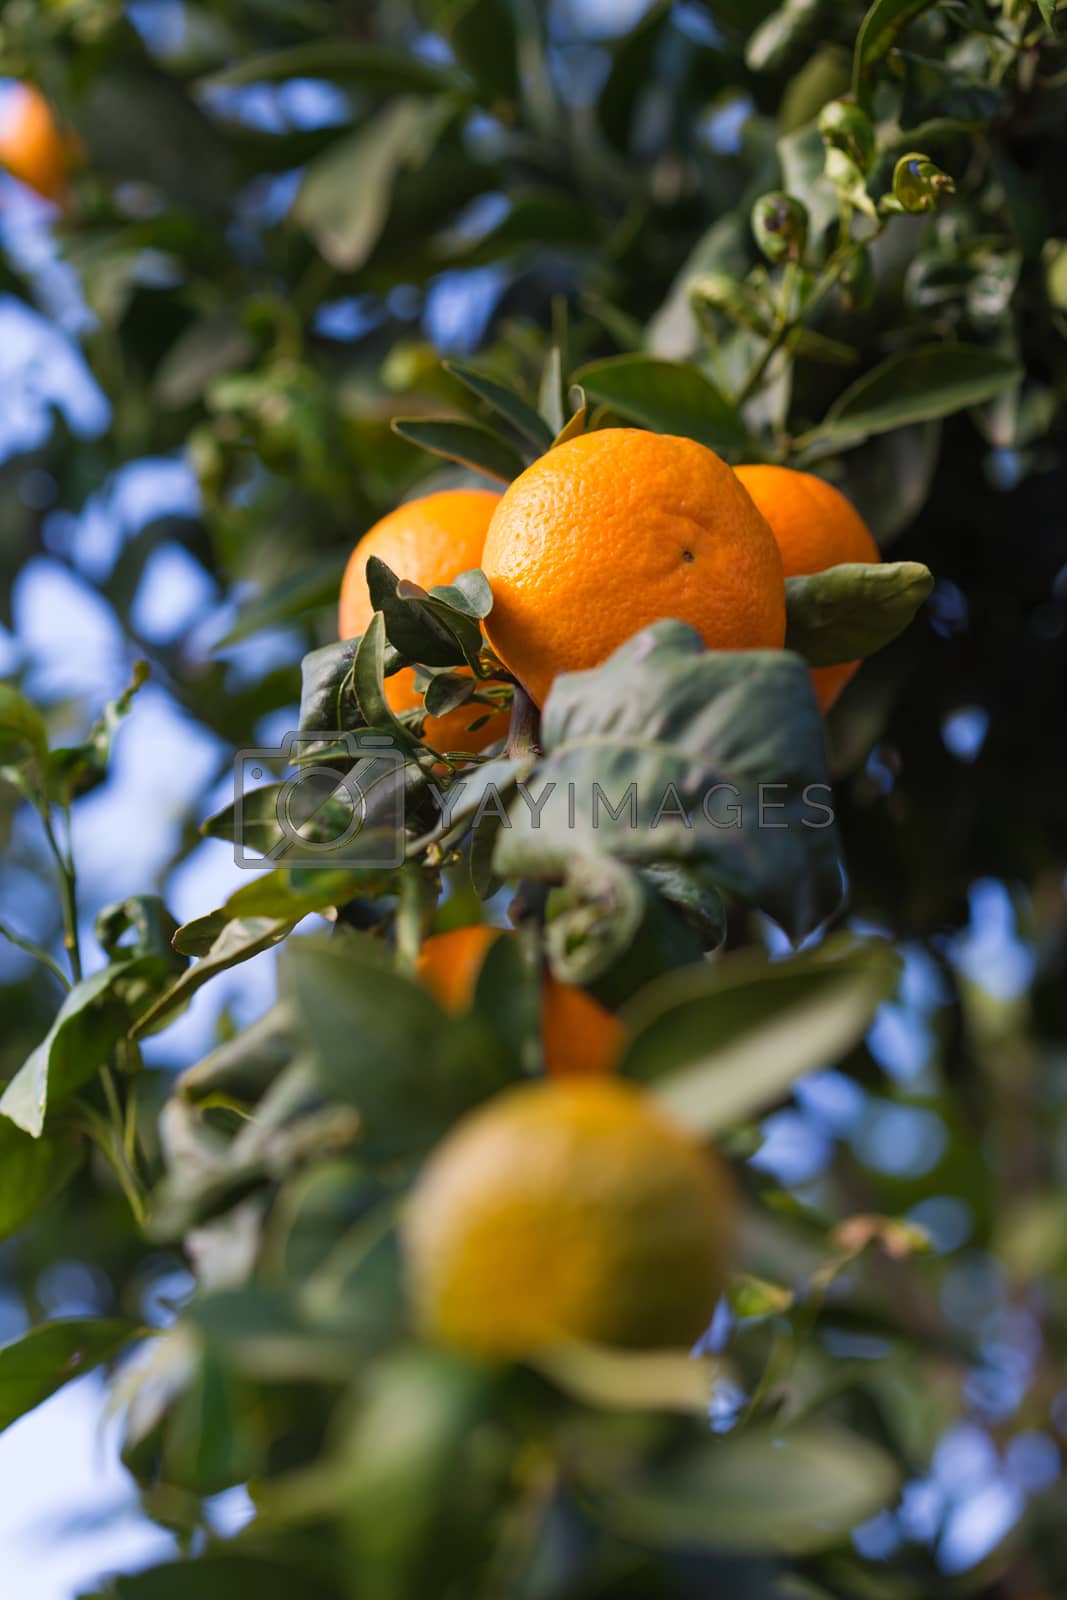 Royalty free image of tangerines growing on a tree  by MegaArt